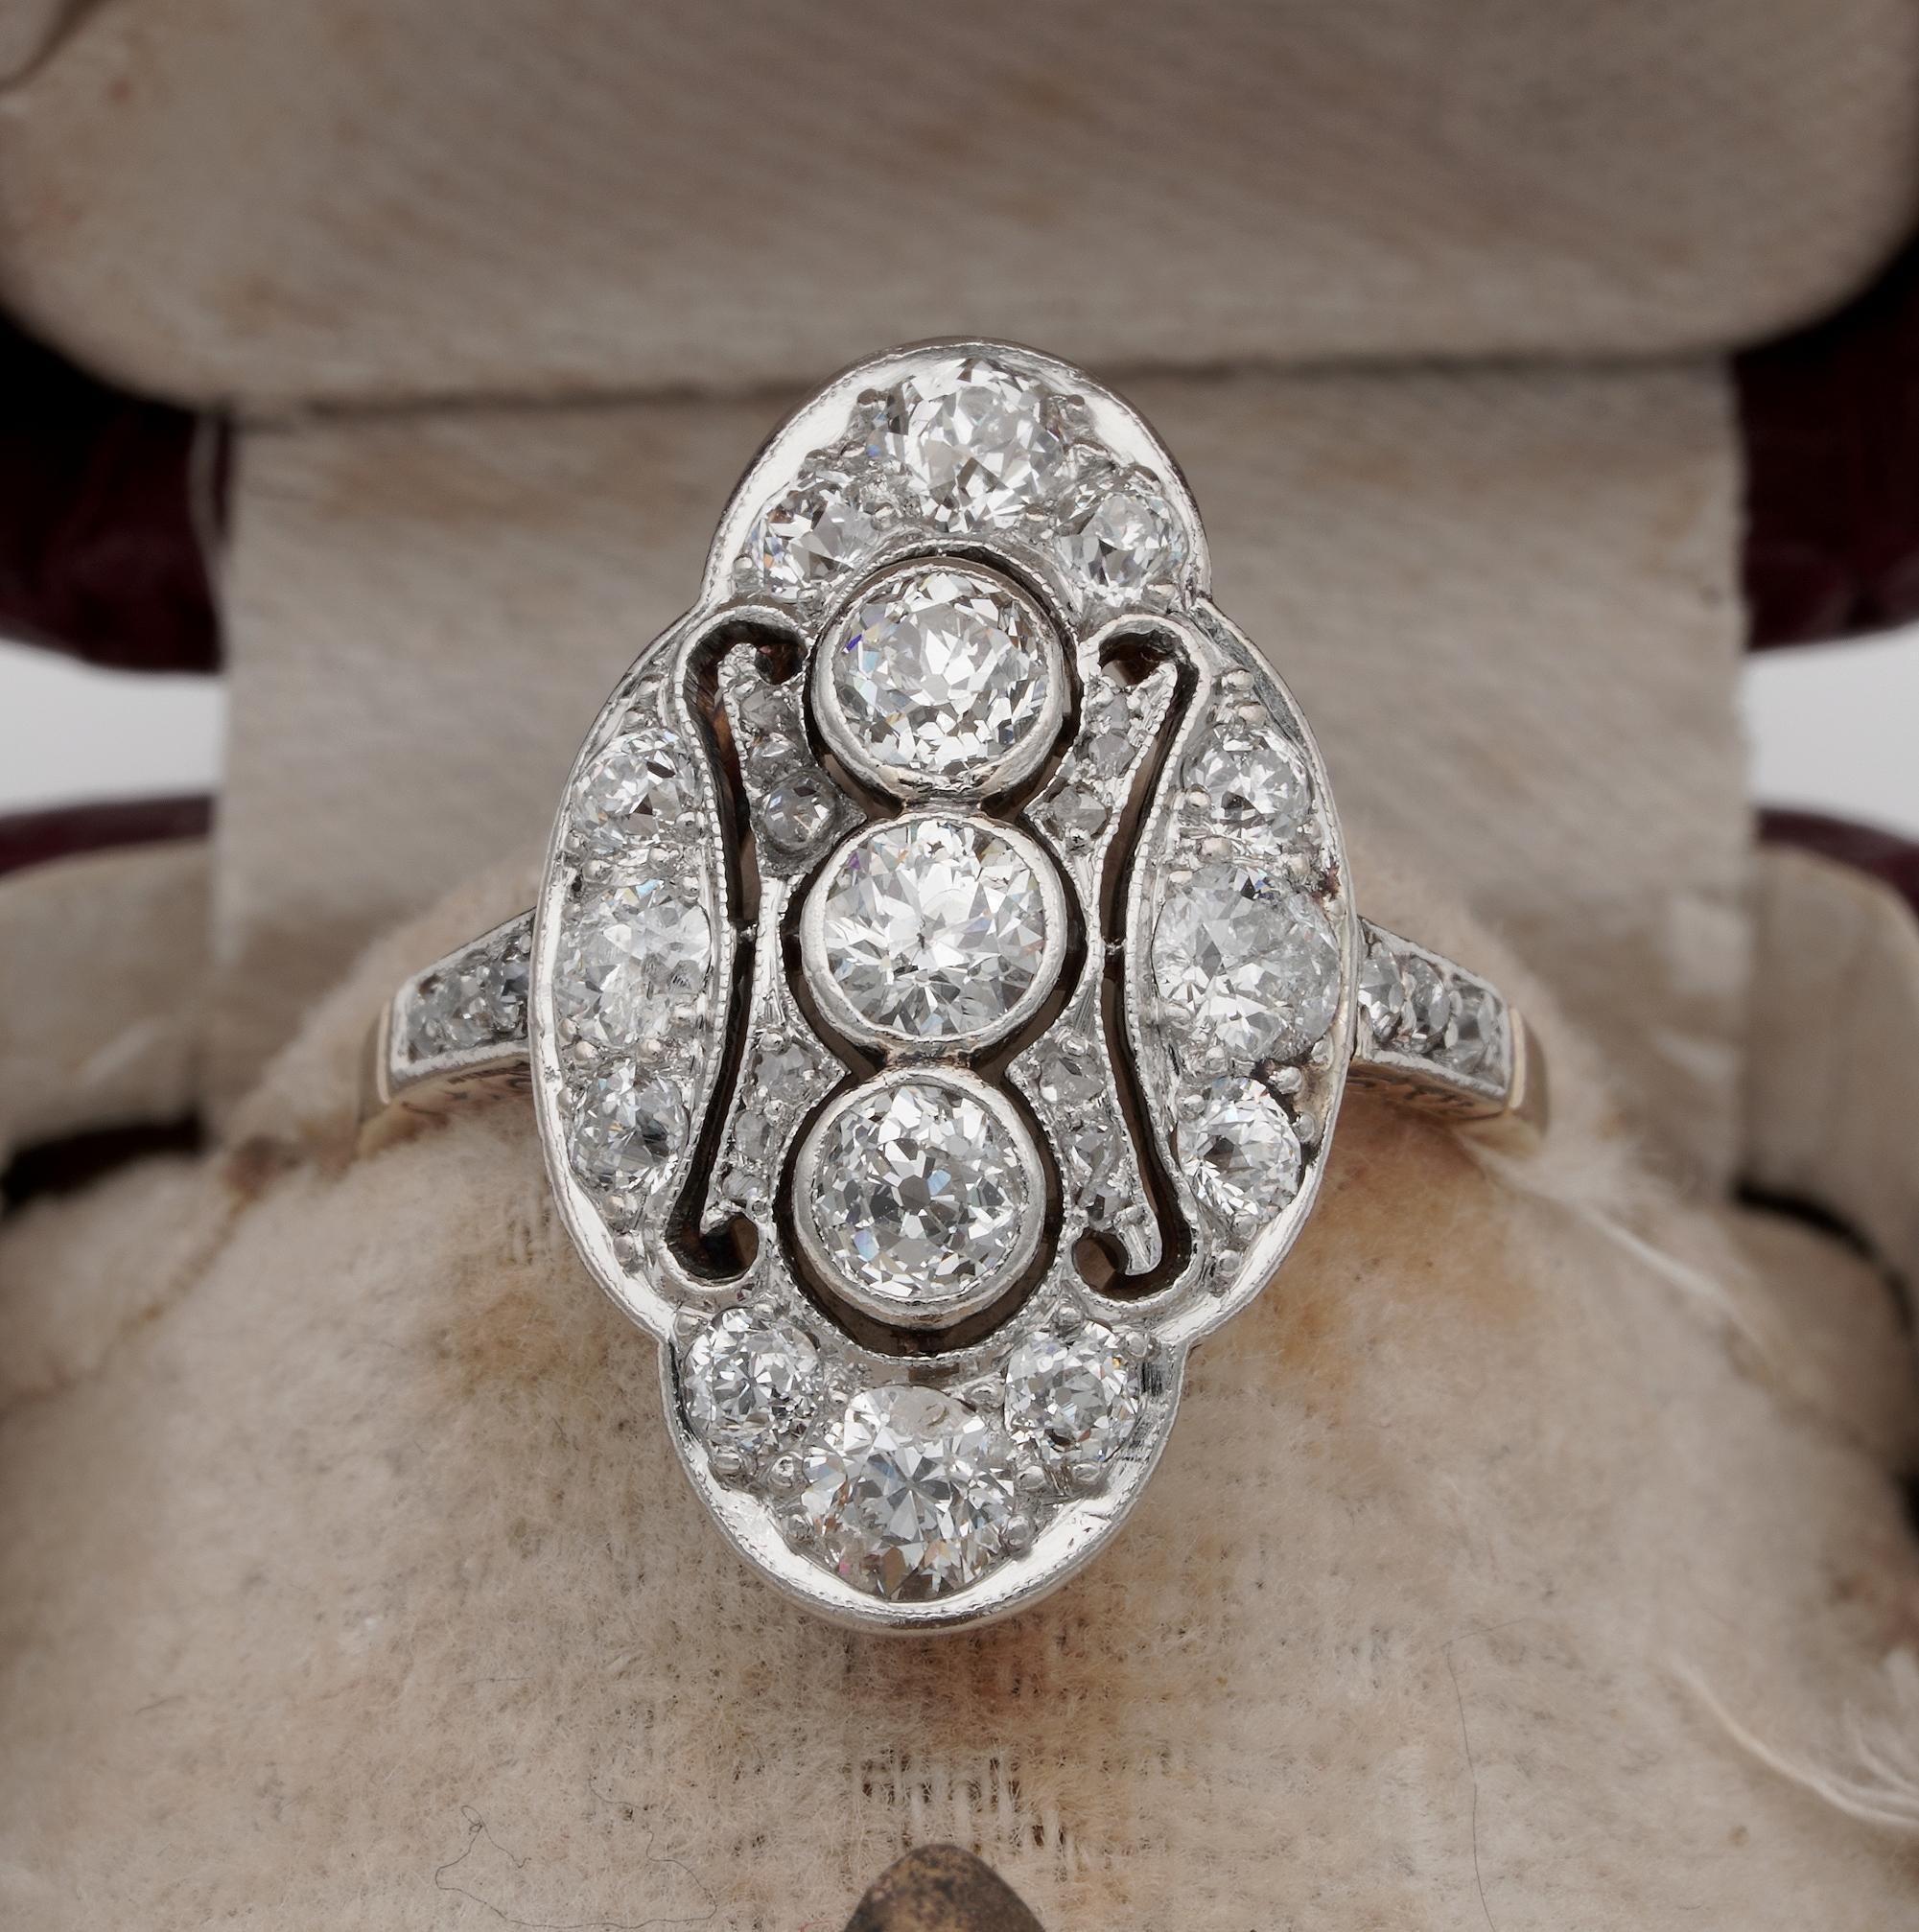 The Beautiful Era

Edwardian jewellery is a stand out for the most refined crafting and design ever made in history
This beautiful example of Diamond panel ring dates 1905 ca - Bearing French Import Marks of the period
Charming Panel design as